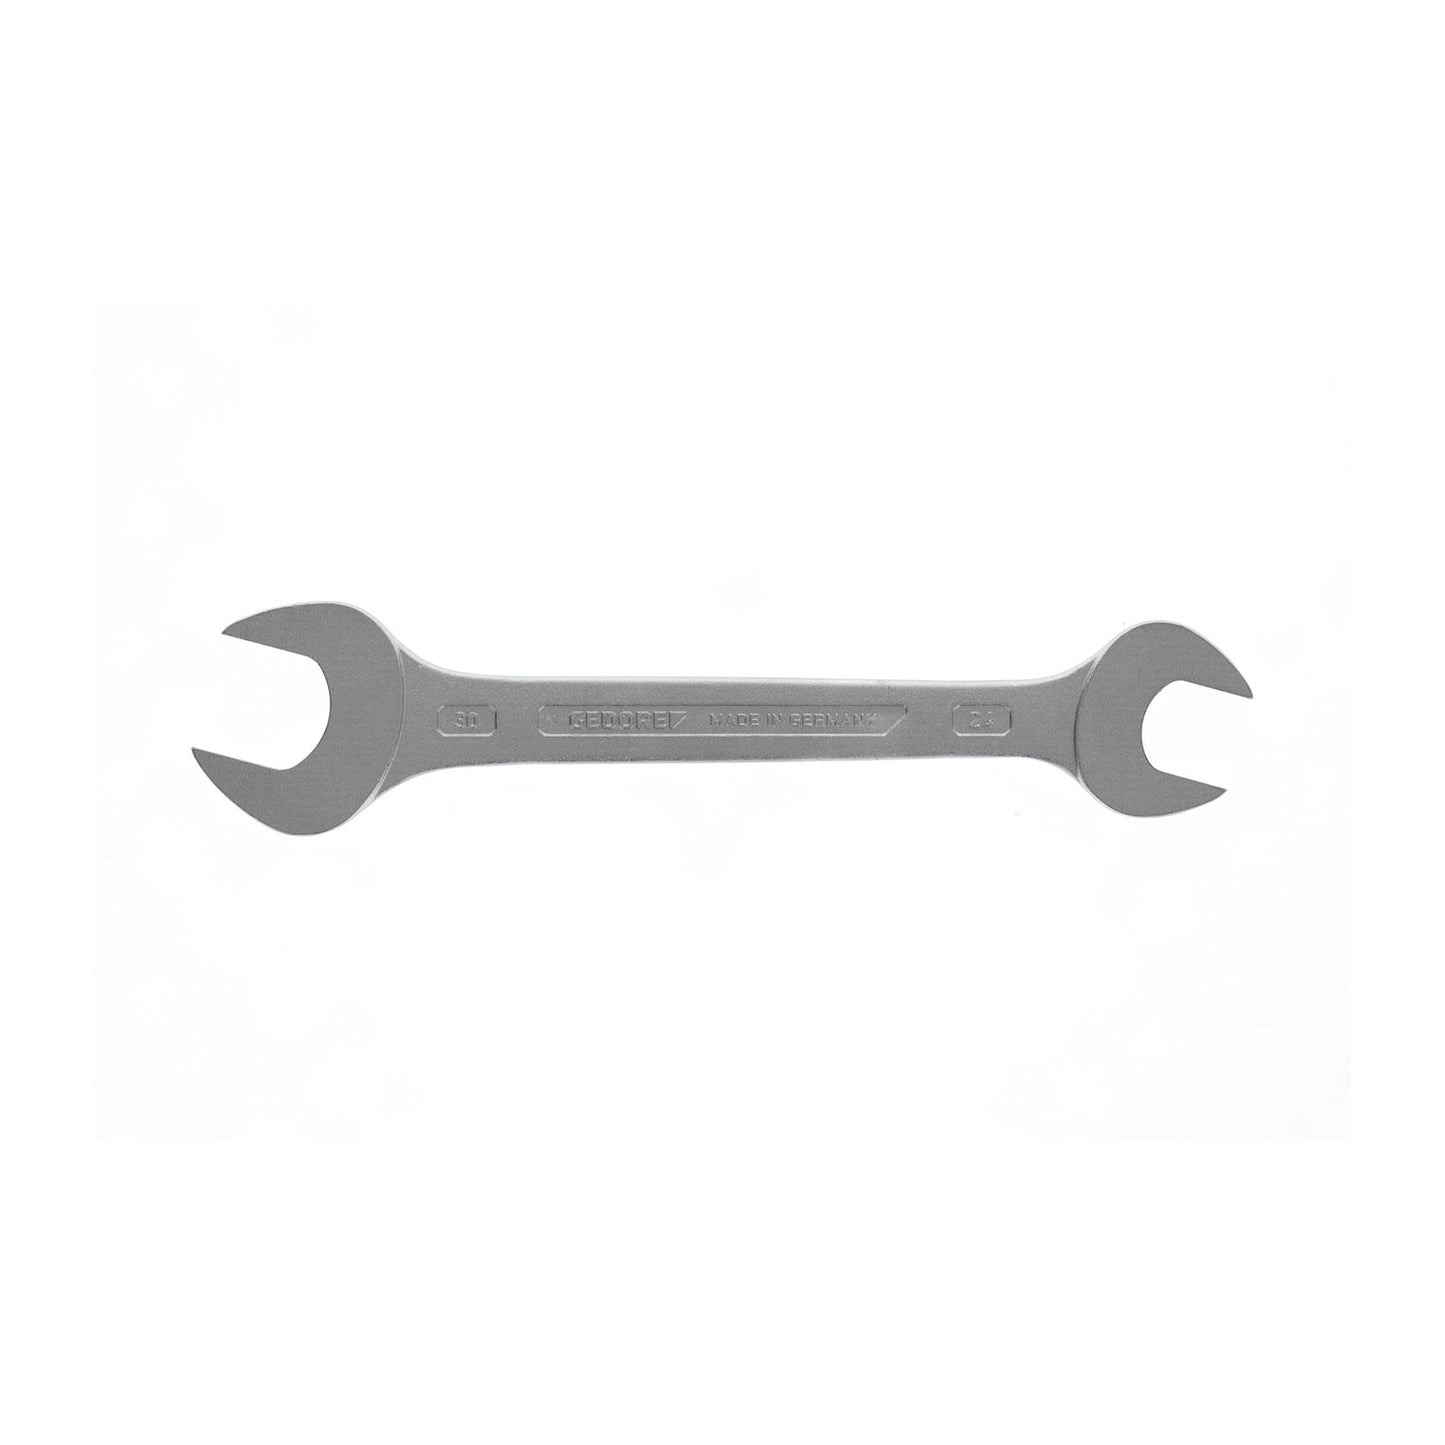 GEDORE 6 24X30 - 2-Mount Fixed Wrench, 24x30 (6067660)